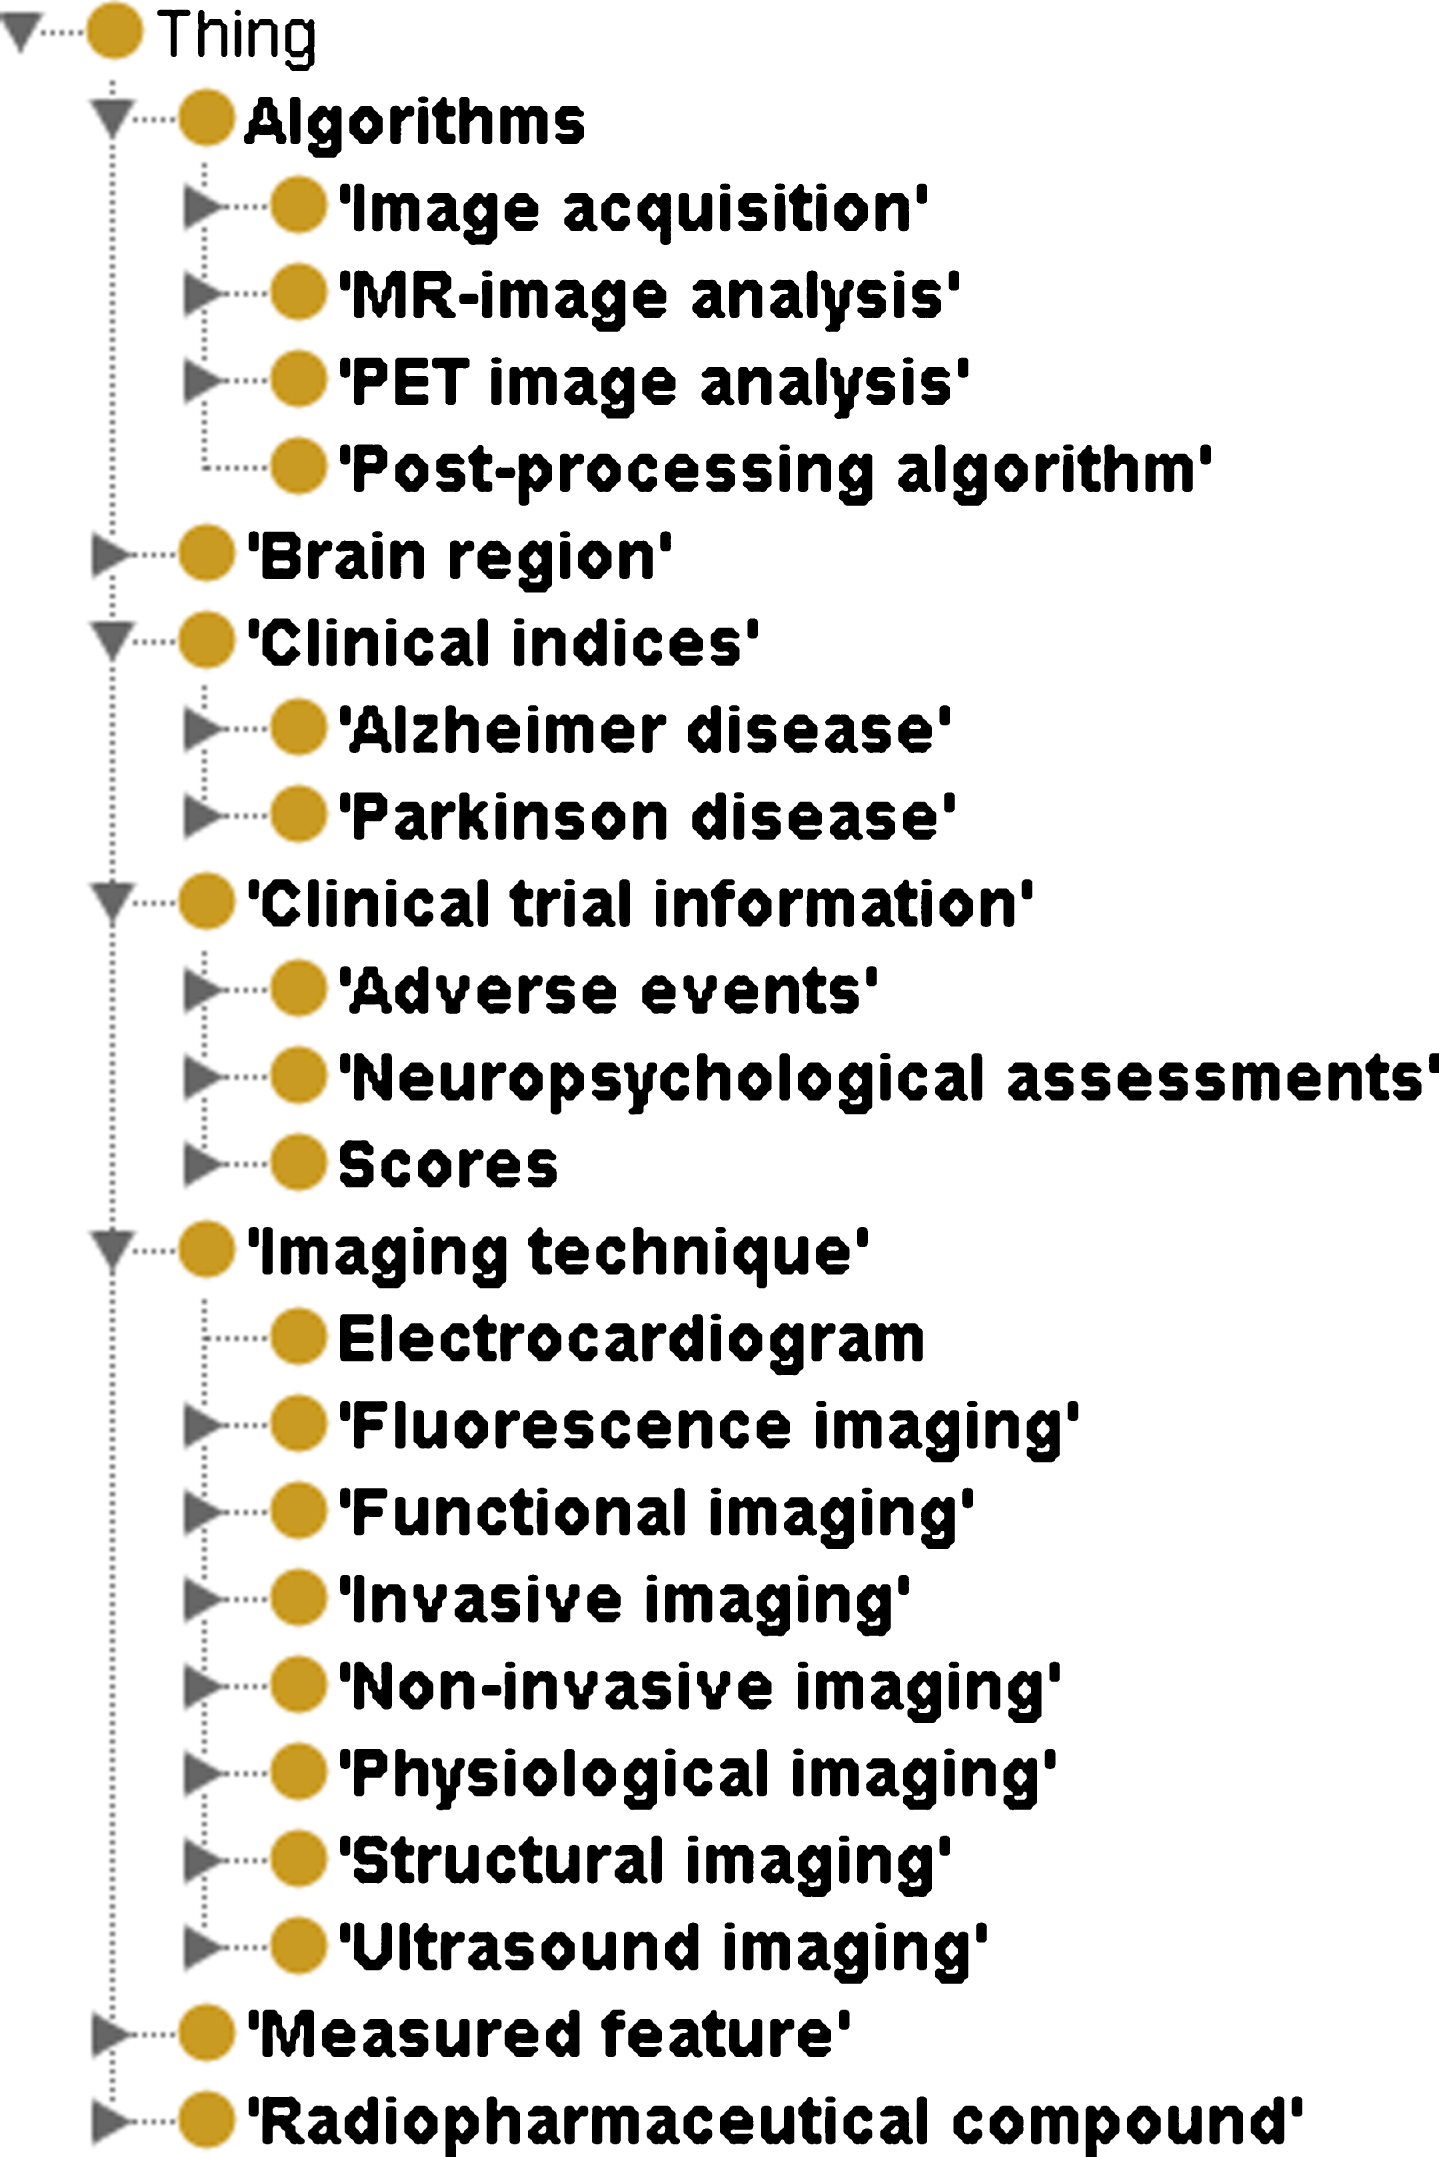 Hierarchical structure of NIFT as visualized in the Protégé OWL Editor. This figure depicts the higher level concepts the terminology namely Algorithms, Brain Region, Clinical Indices, Clinical trial information, Imaging Technique, Measured Feature, and Radiopharmaceutical compound.